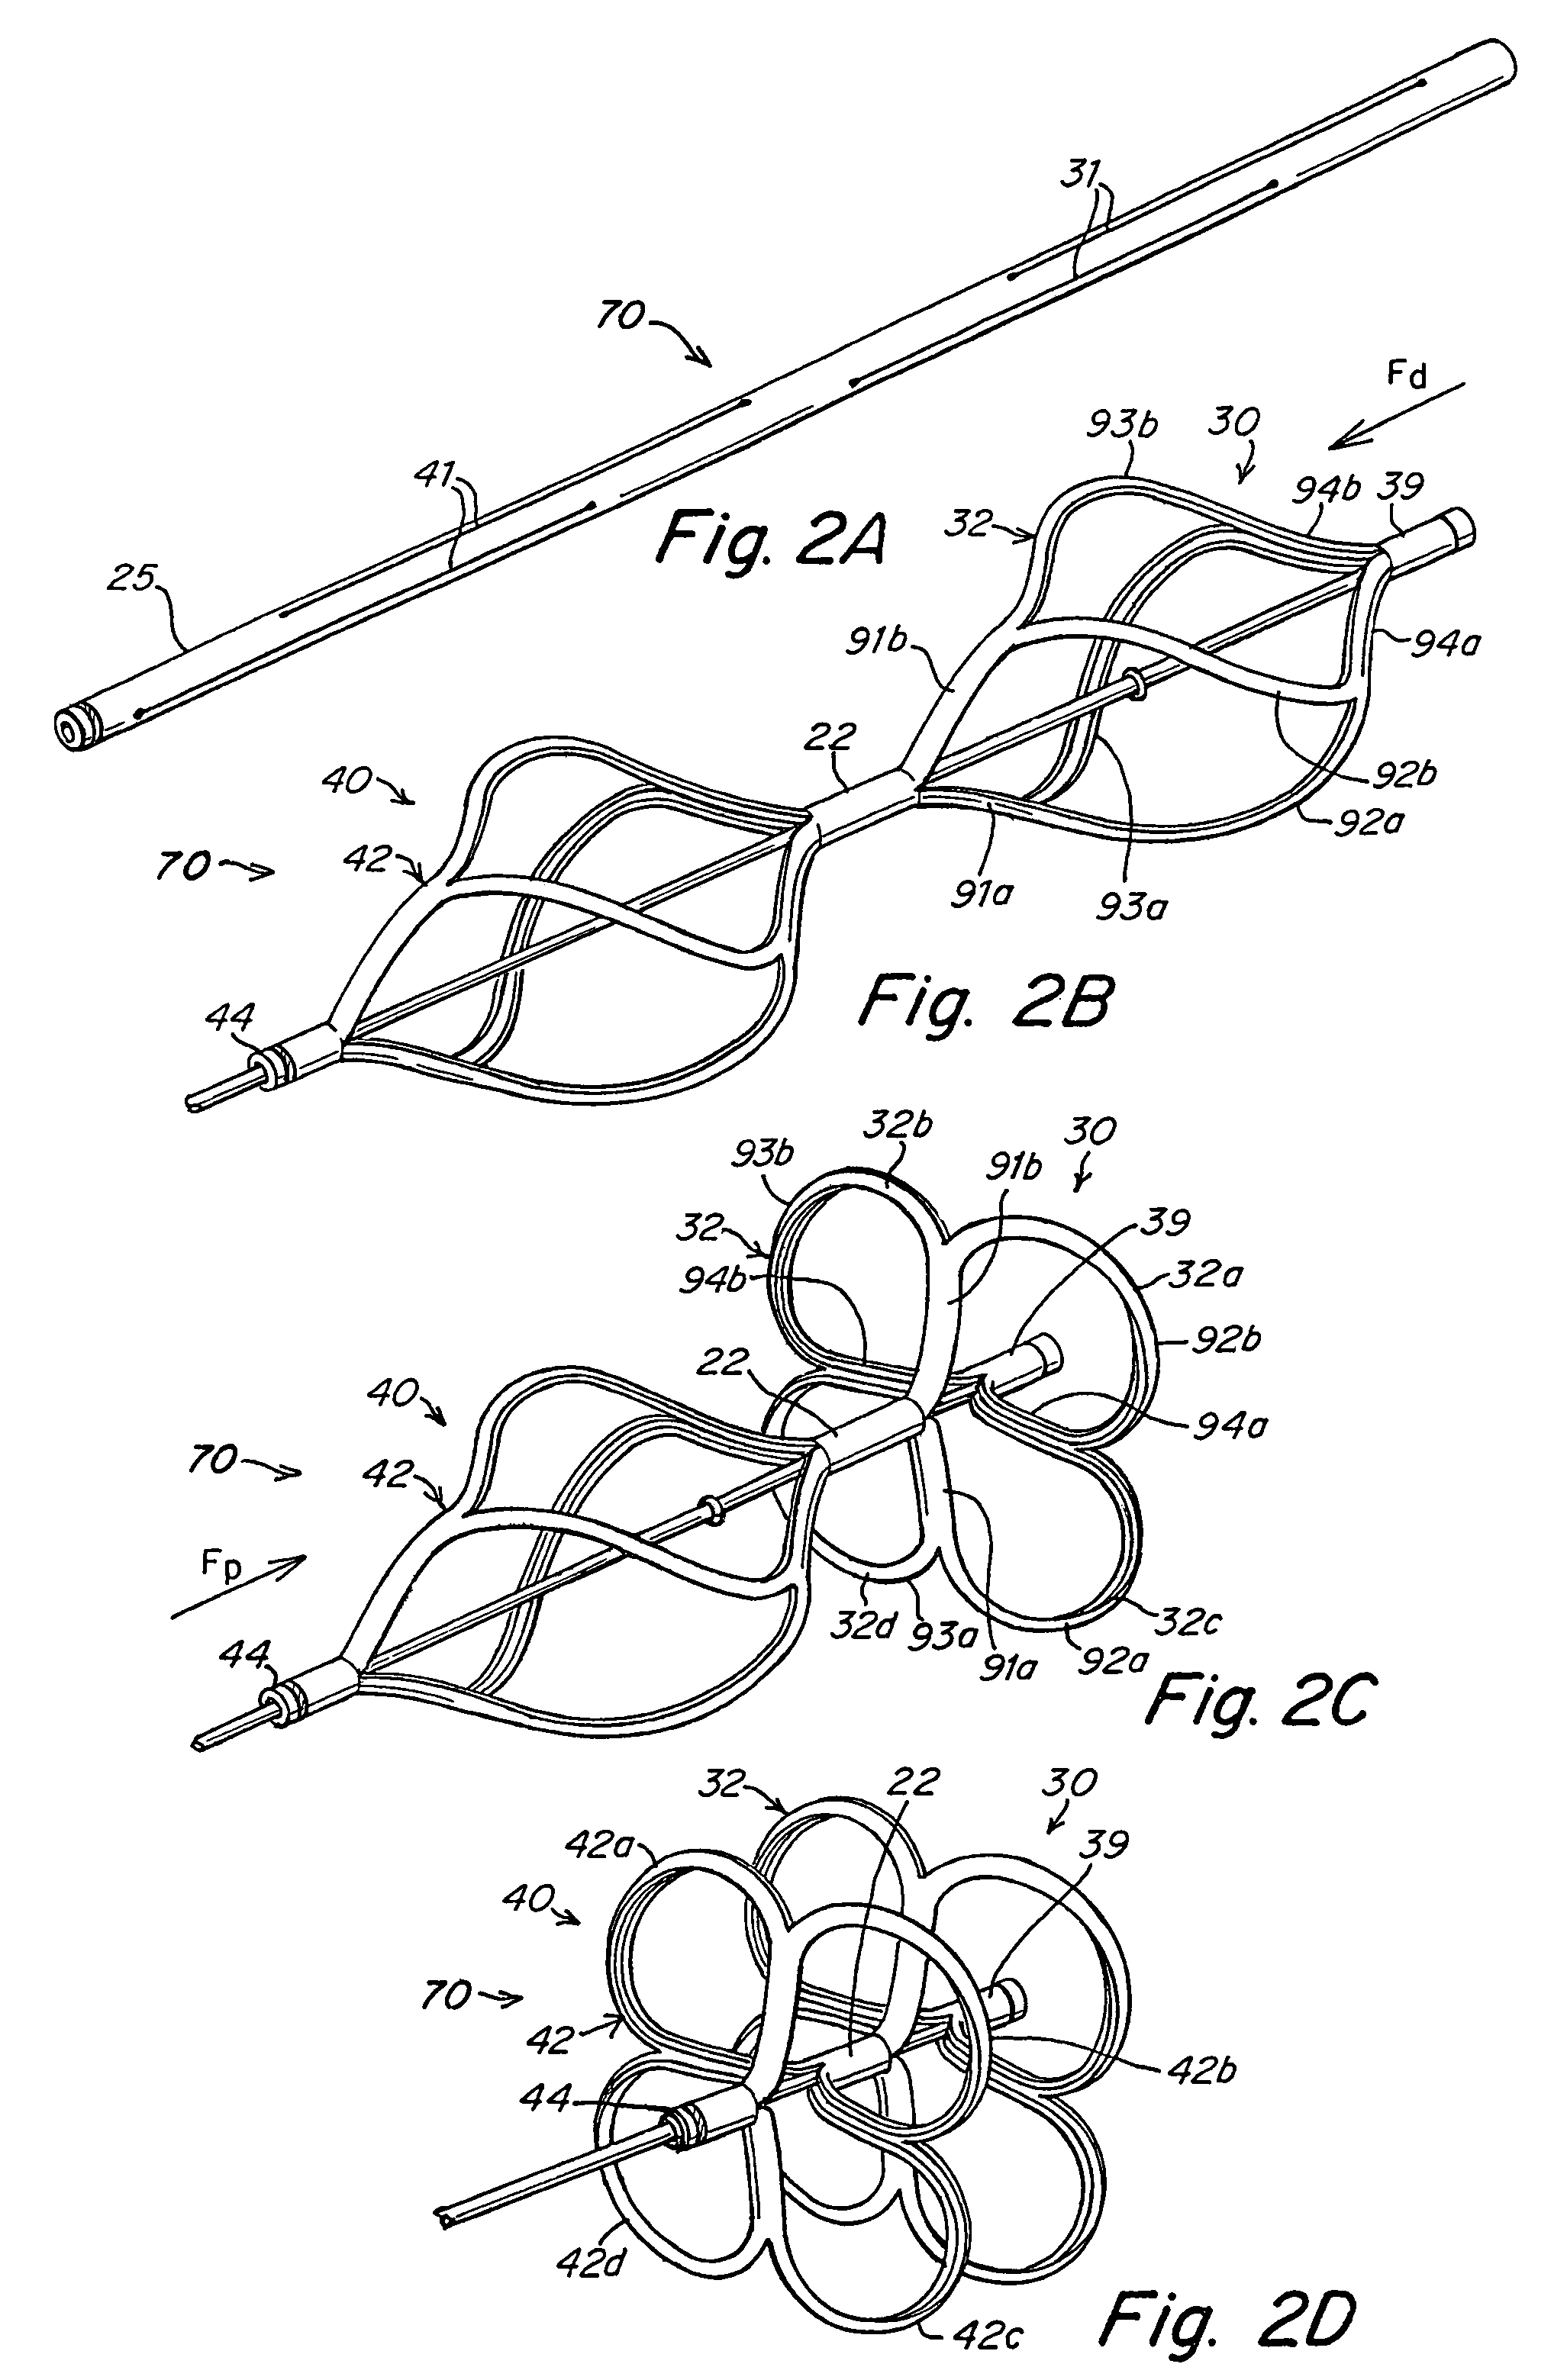 Occluder device double securement system for delivery/recovery of such occluder device